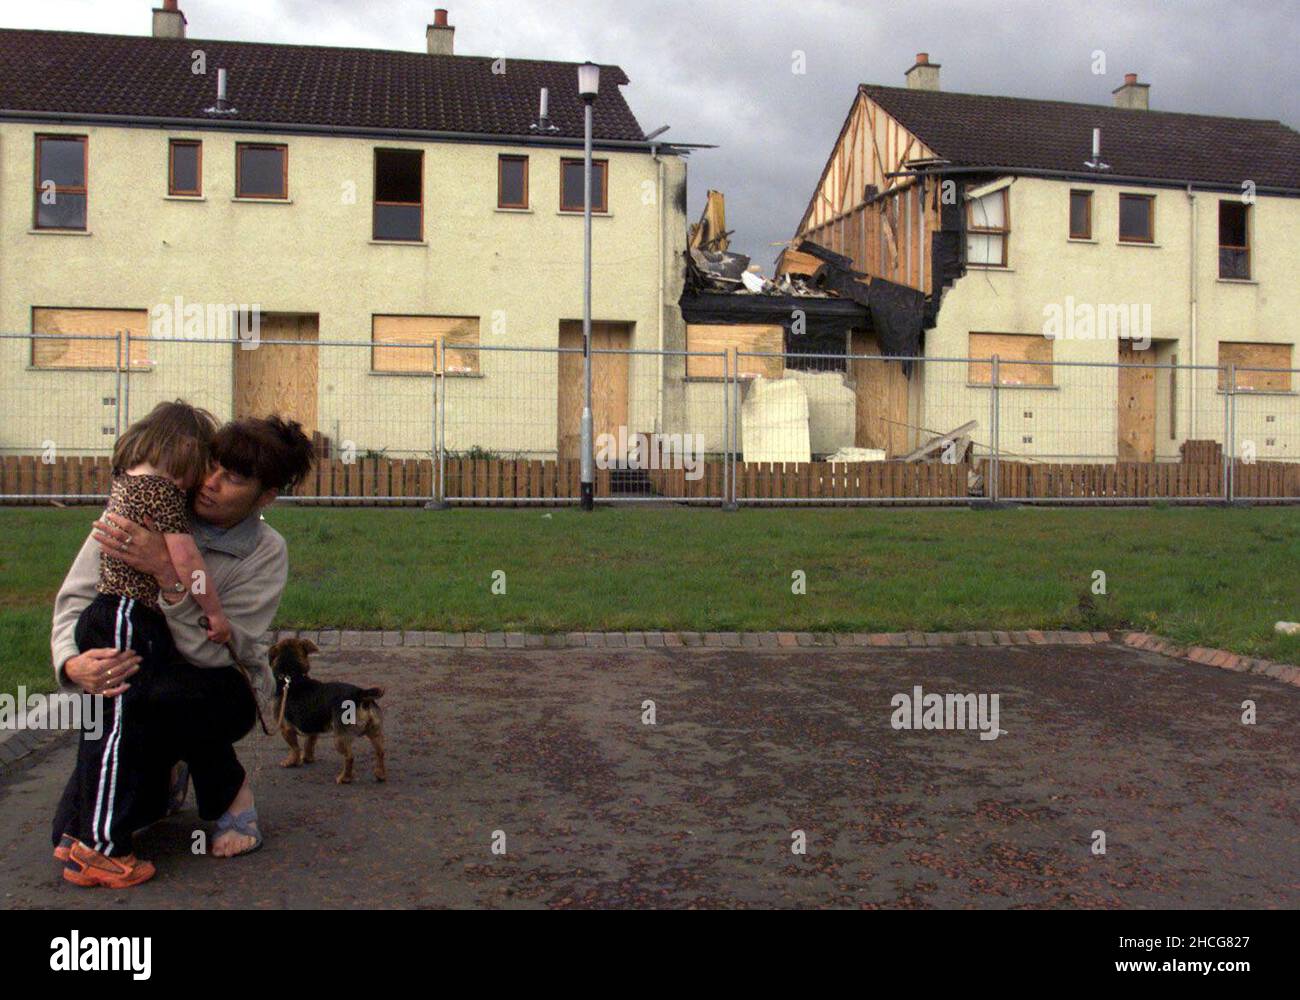 File photo dated 22/04/99 of a mother comforting a young child as contractors moved in to demolish the Quinn family home in Ballymoney, scene of the arson attack in July 1998 which killed 3 young Catholic boys Richard, Mark and Jason at the height of the Drumcree stand off. Prime Minister Tony Blair told the head of the Orange Order to call for an immediate end to the Drumcree parading dispute hours after three young brothers were killed in a loyalist firebomb attack, according to newly released documents from the National Archives. Issue date: Wednesday December 29, 2021. Stock Photo